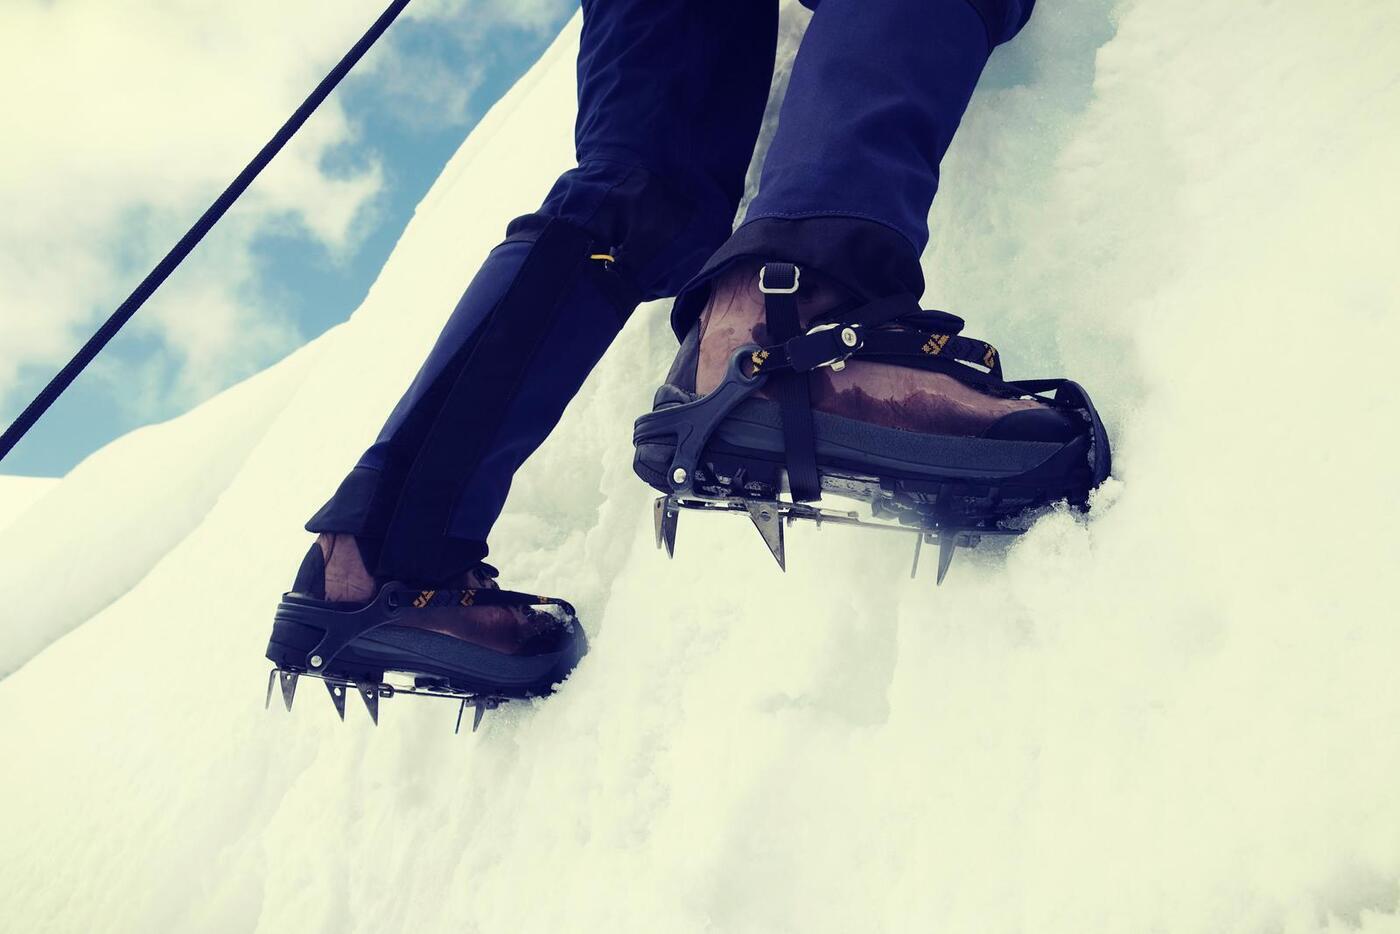 Crampons 101: All You Need To Know